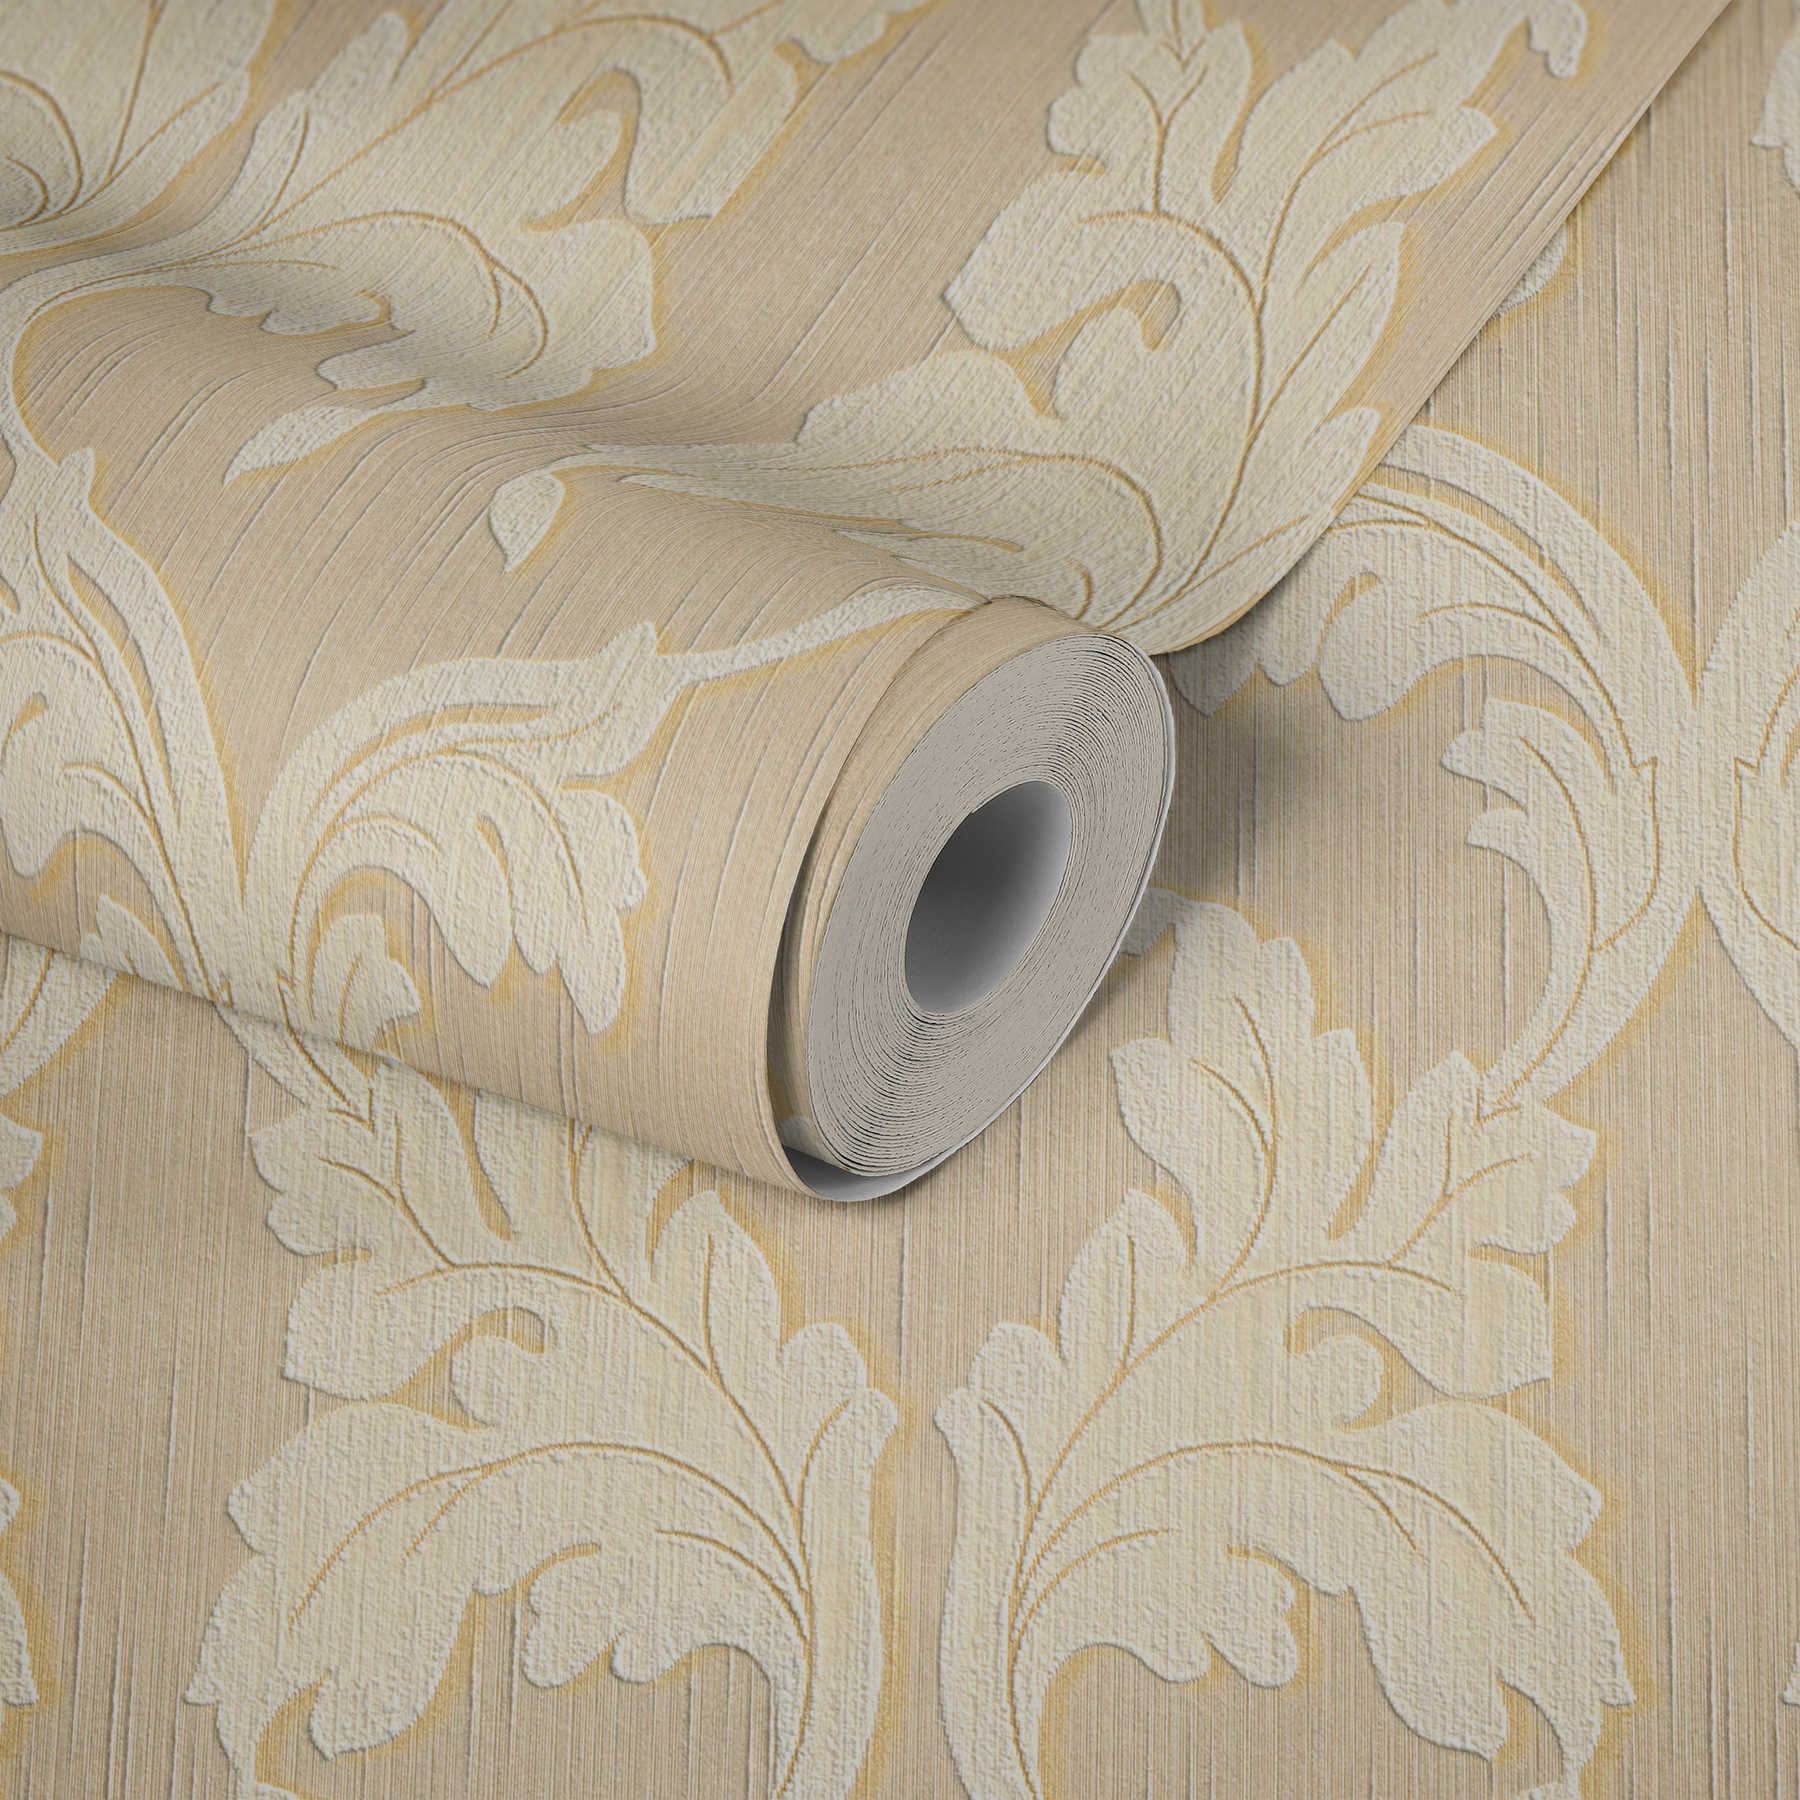             Textile wallpaper with baroque tendrils - beige, yellow
        